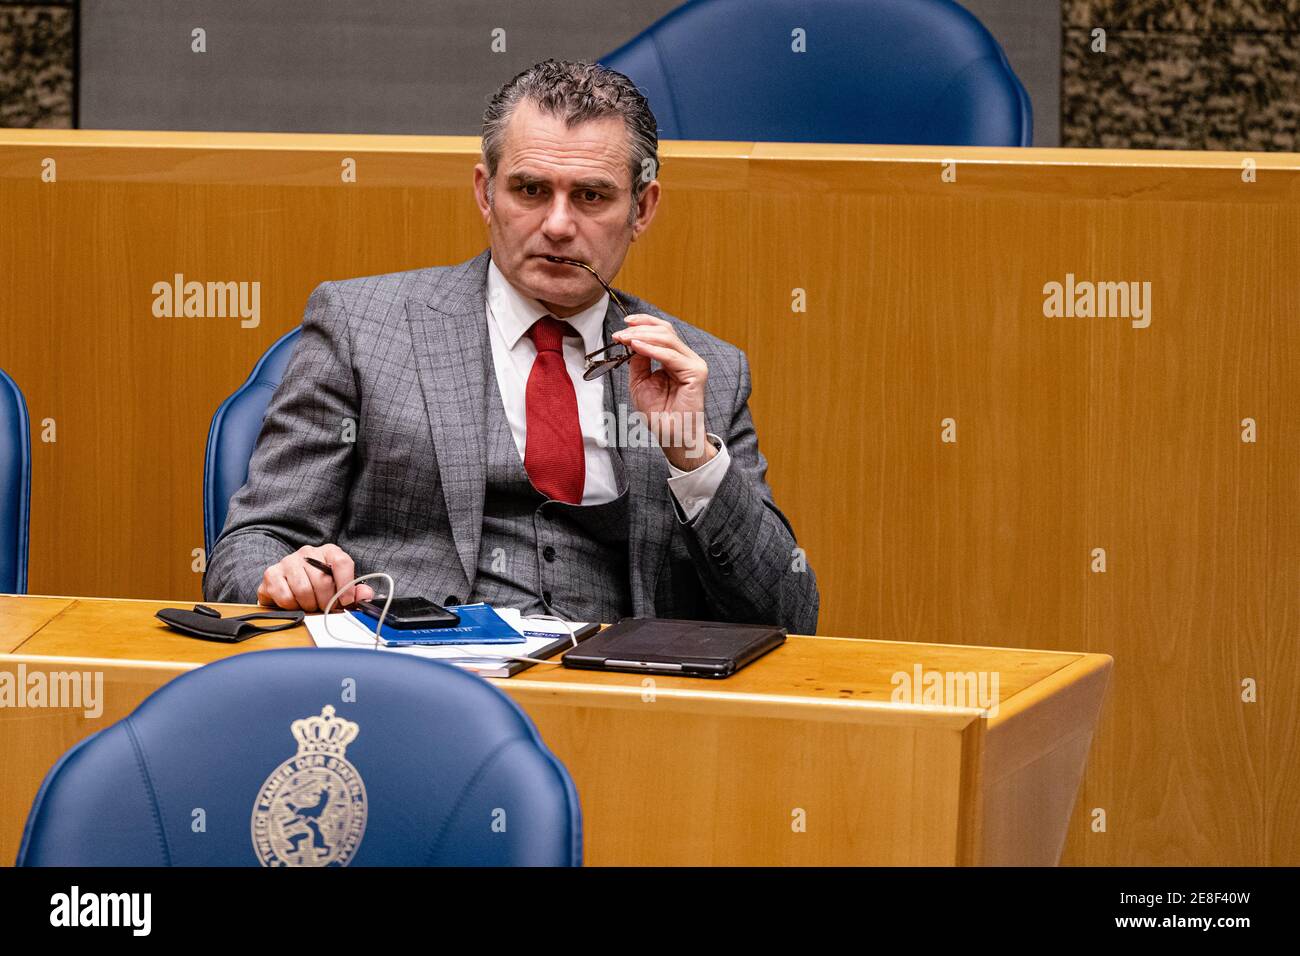 THE HAGUE, NETHERLANDS - JANUARY 19: Roelof Bisschop of SGP seen during the plenary debate in the Tweede Kamer parliament about the resignation of the Stock Photo